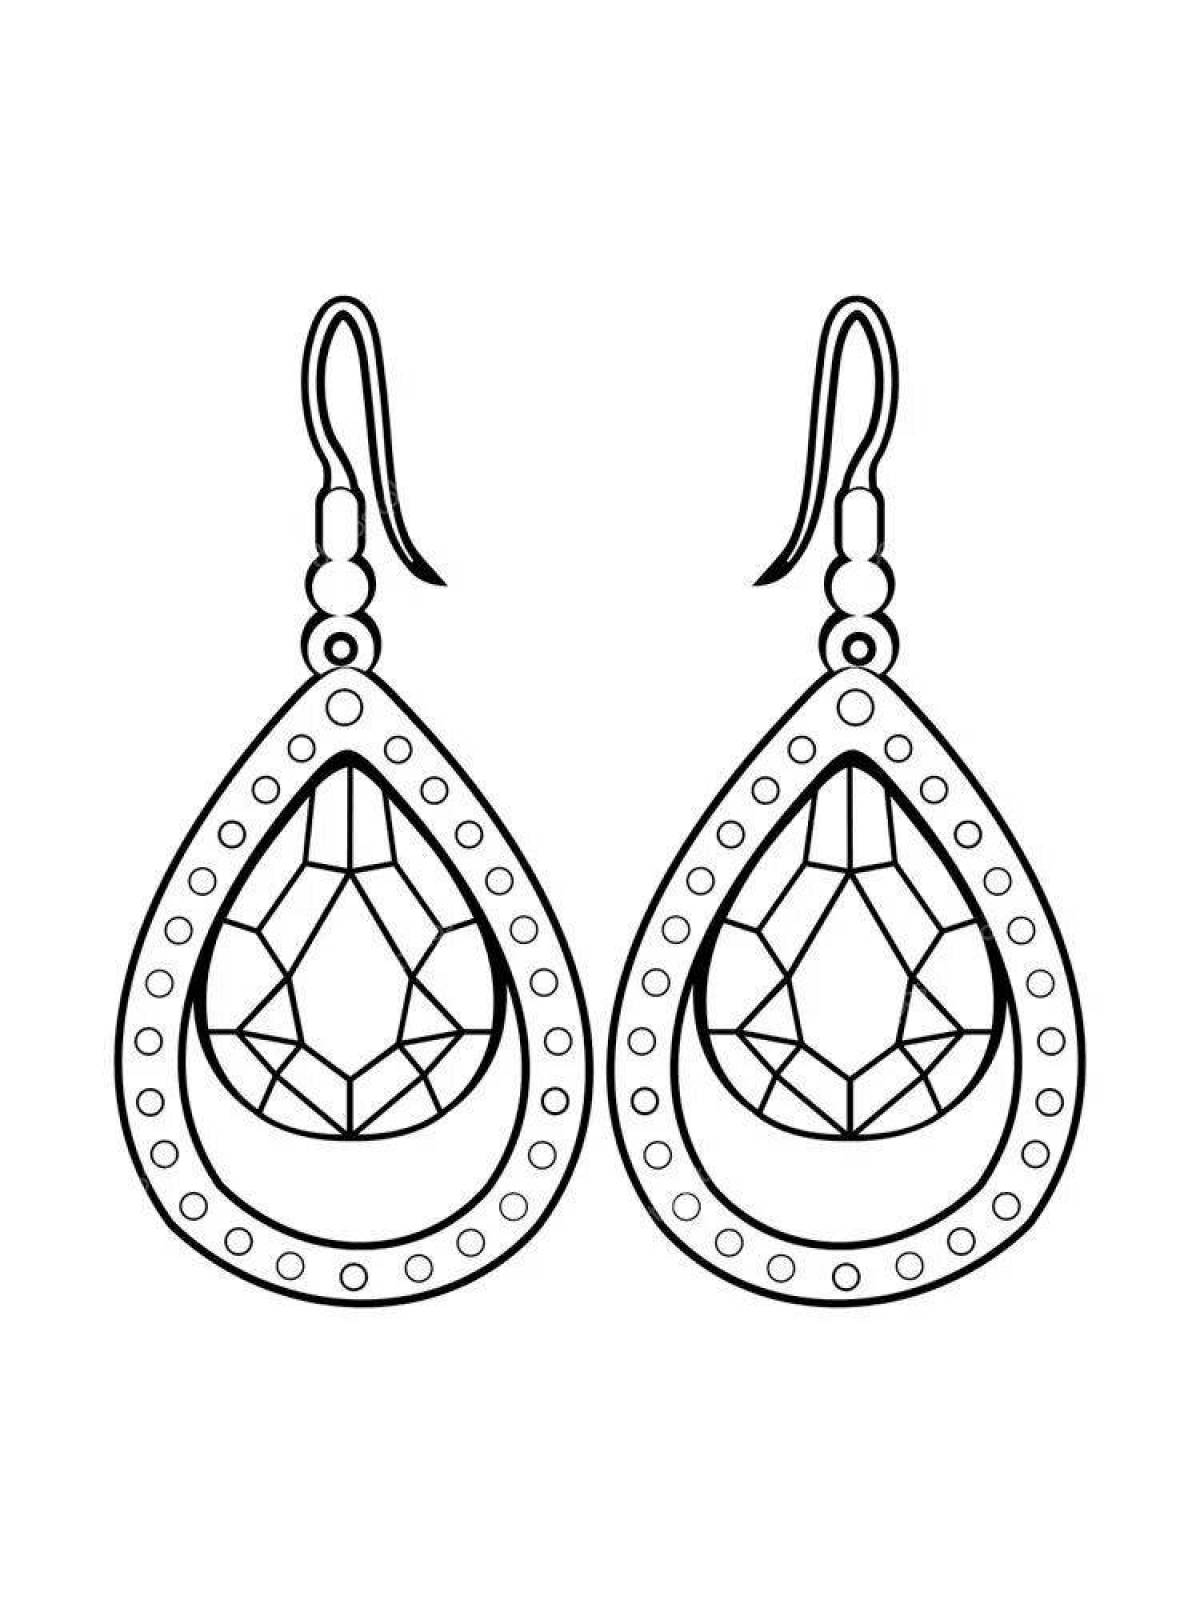 Tiny earring coloring page